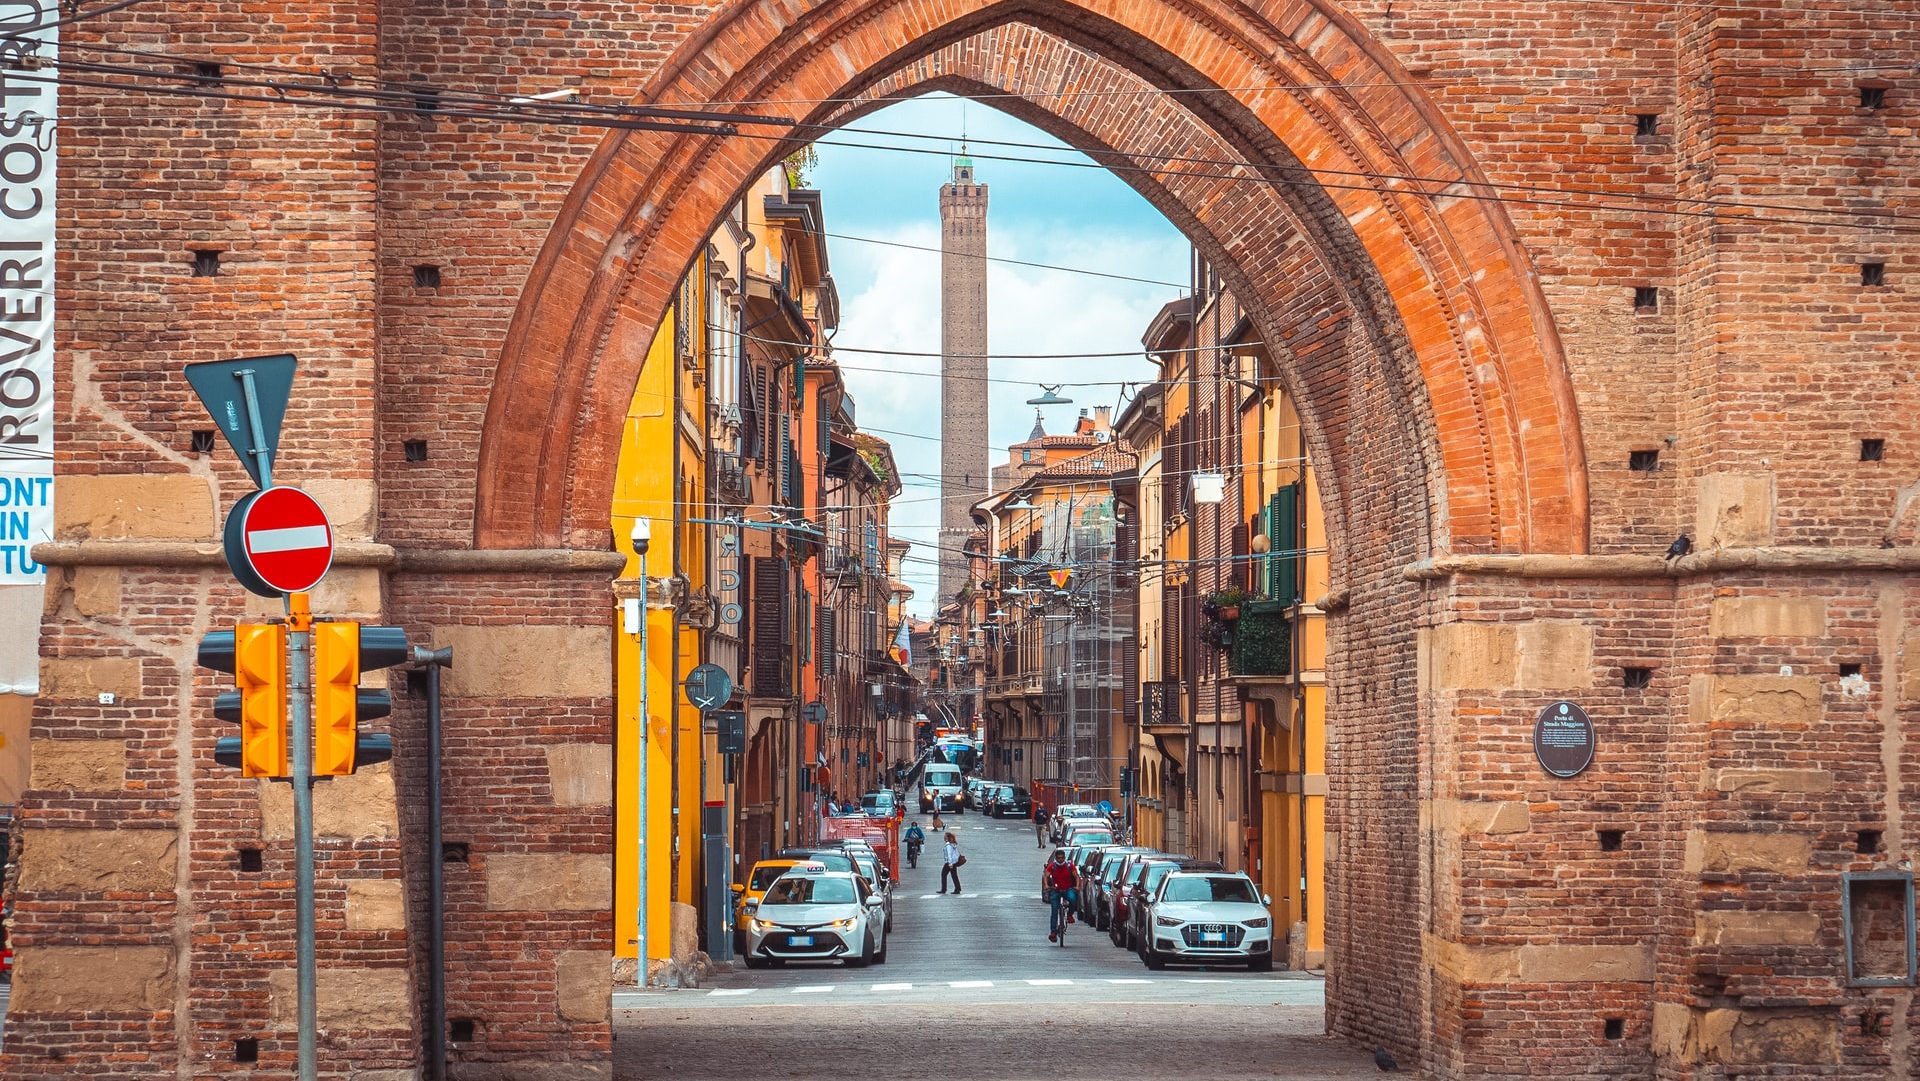 Home to most attractions, food markets, restaurants and nightlife, Centro Storico is the best area to stay in Bologna